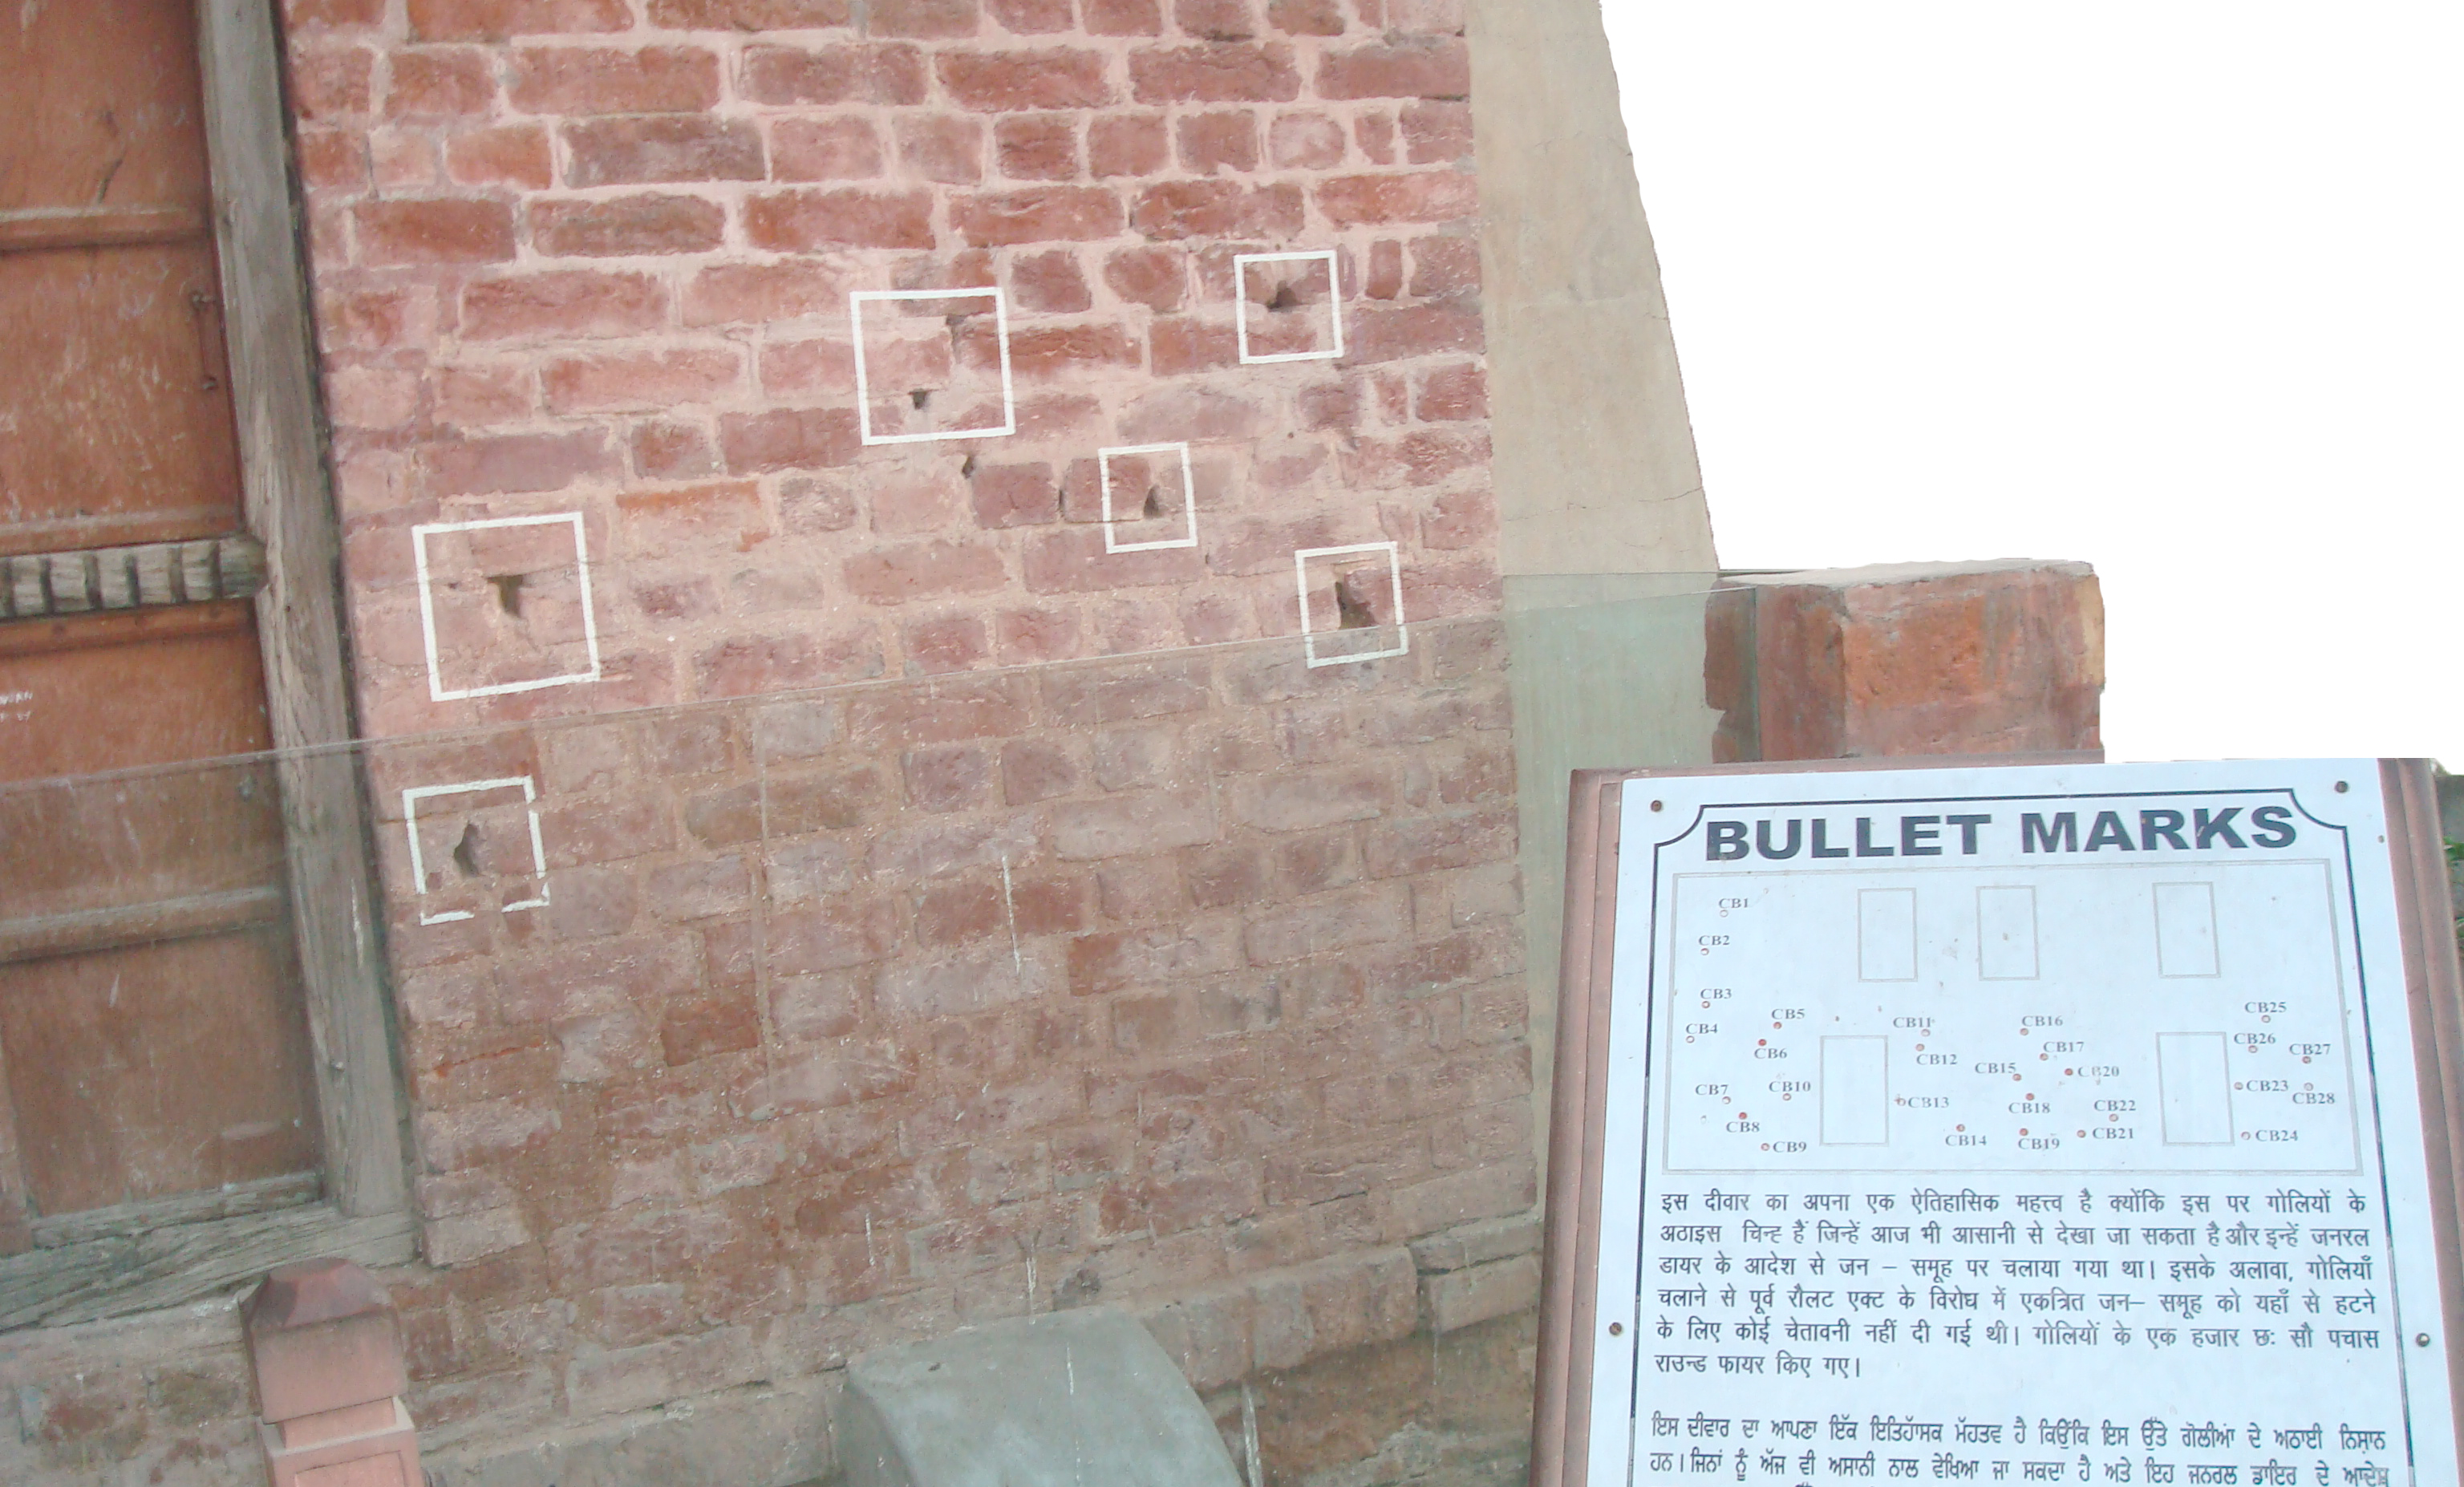 Bullet marks on a wall in Jallianwala Bagh